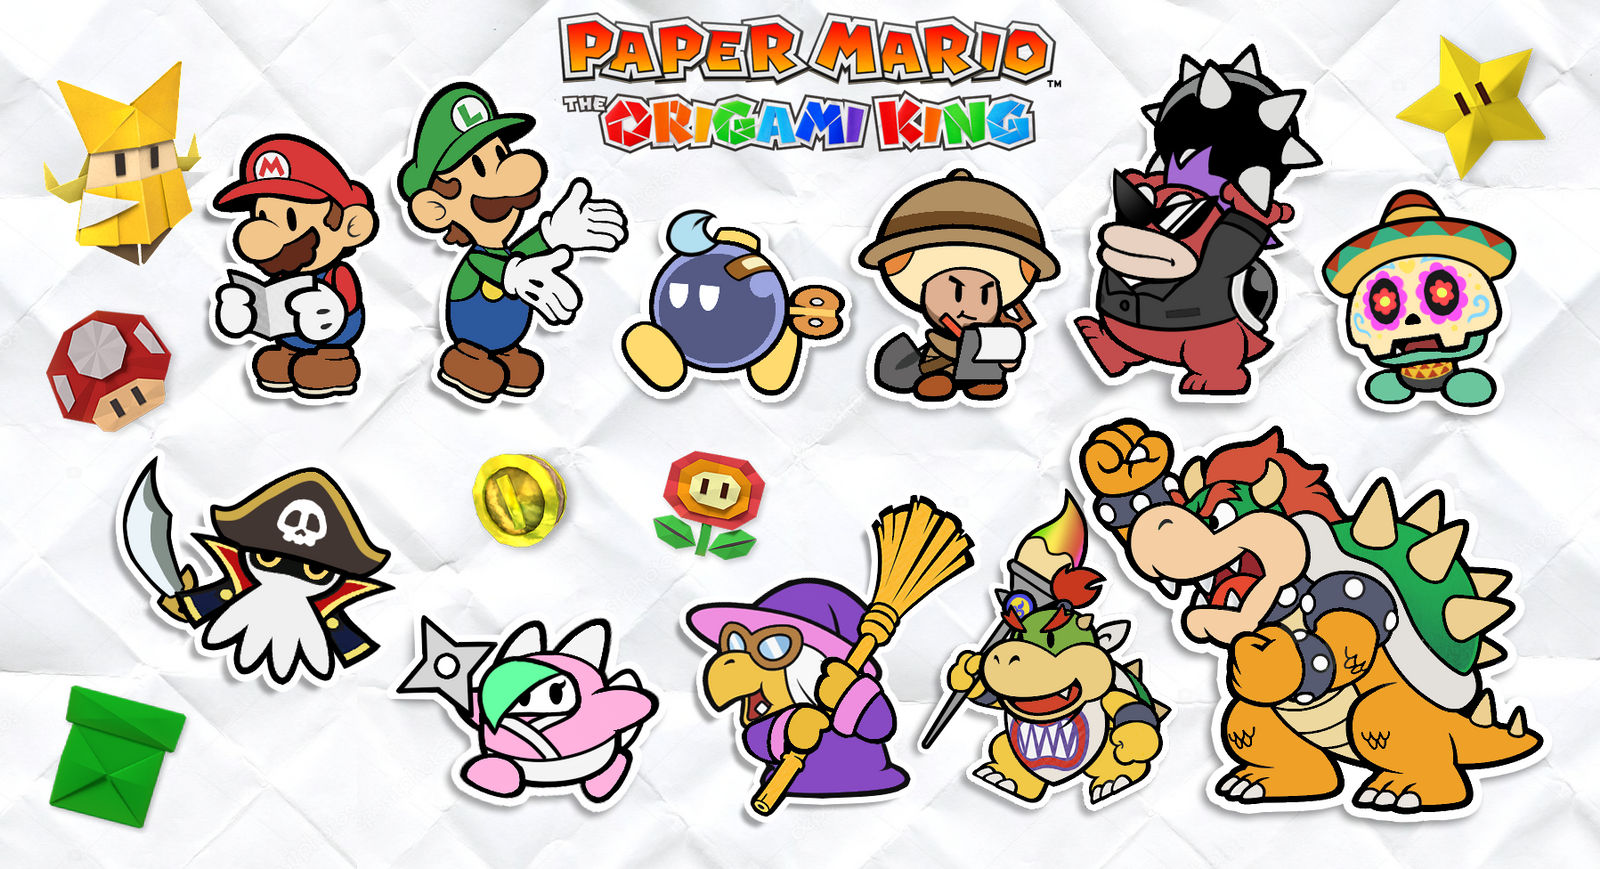 Paper Mario: The Origami King Reimagined Partners by Zieghost on DeviantArt